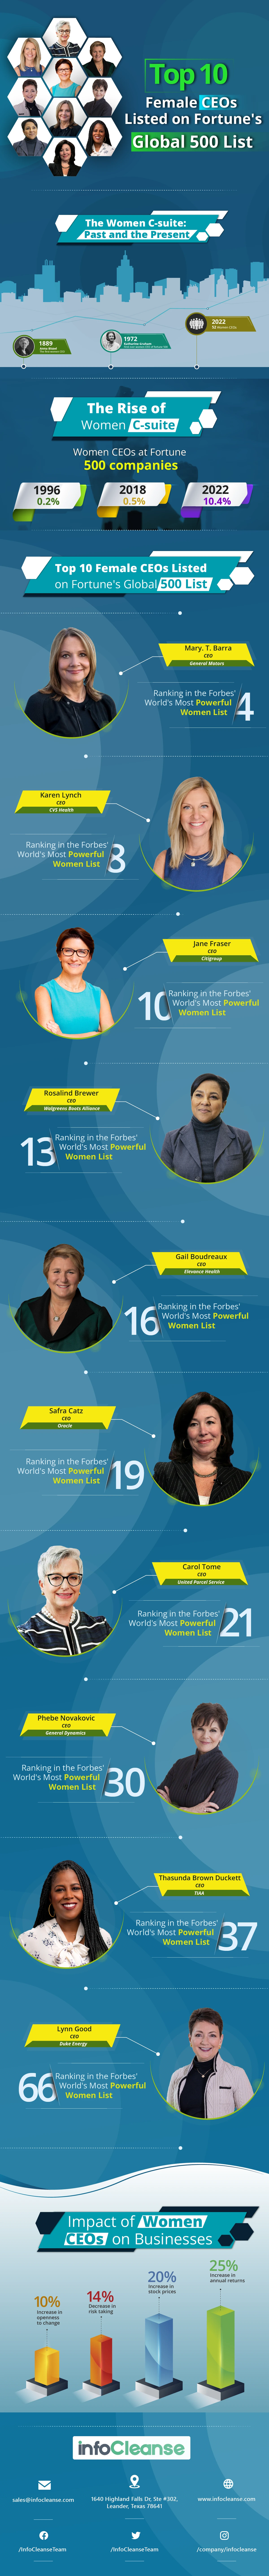 Infographic-Top 10 Female CEOs Listed on Fortune's Global 500 List